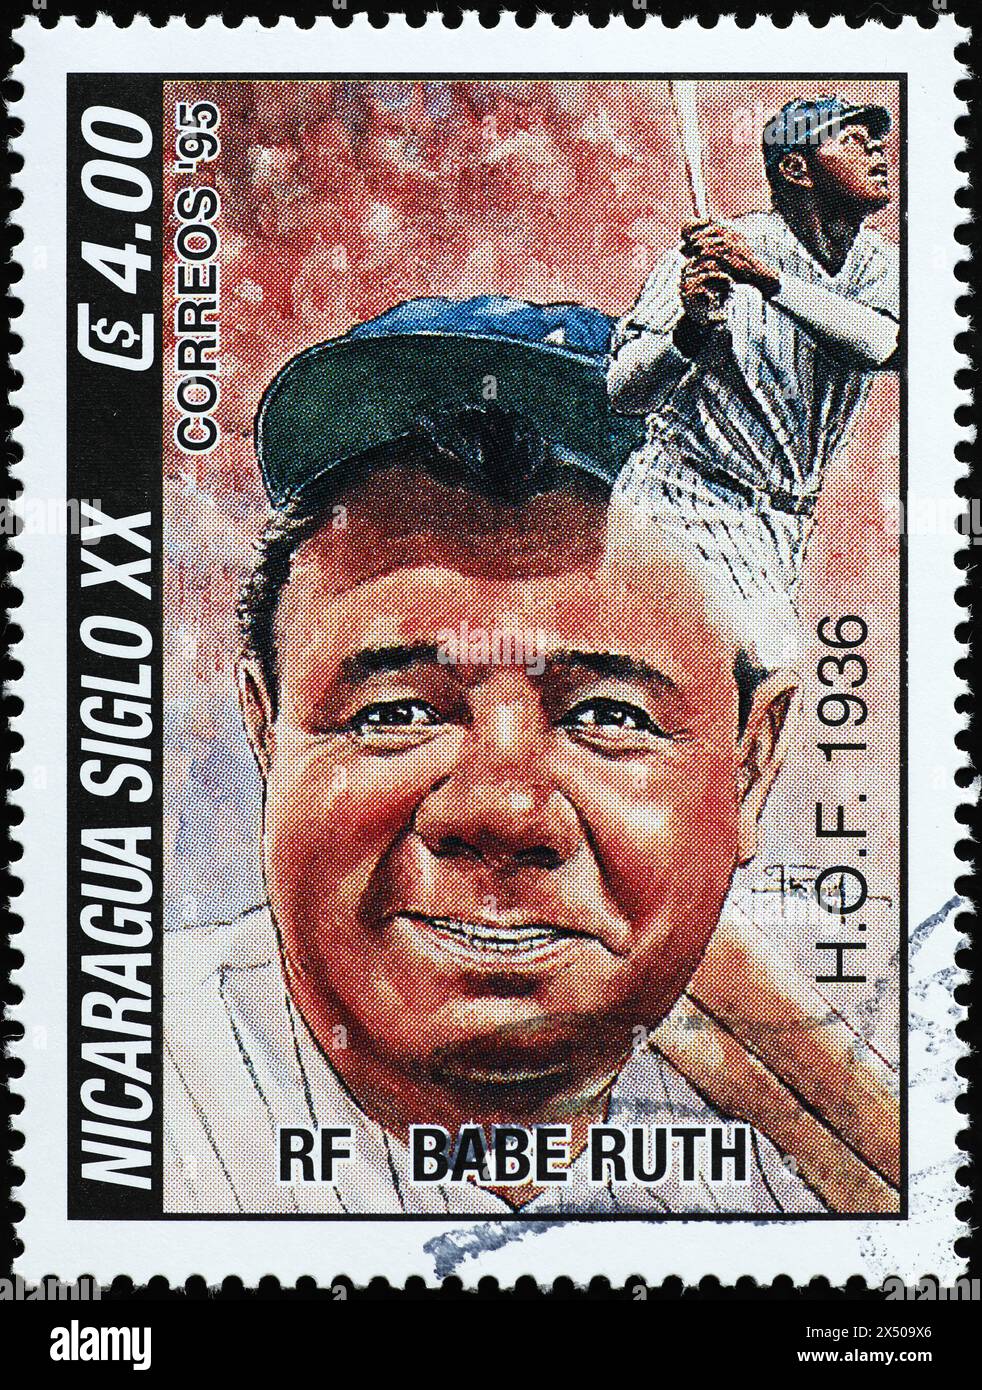 Baseball player Babe Ruth on stamp from Nicaragua Stock Photo